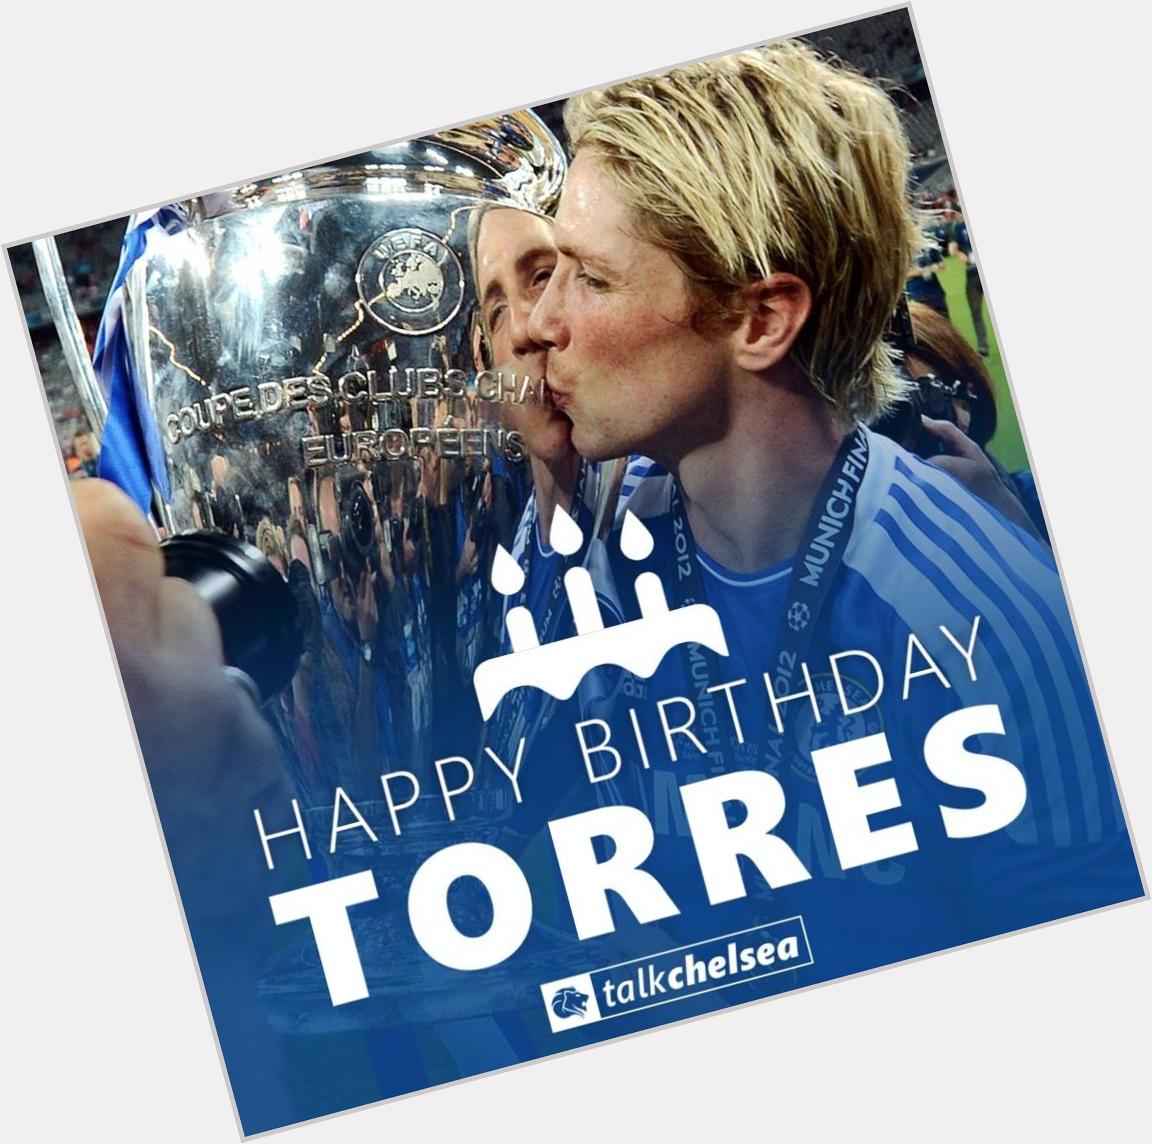 Happy Birthday to the man who gave us one of the greatest moment of our lives! 

FERNANDO TORRES!   